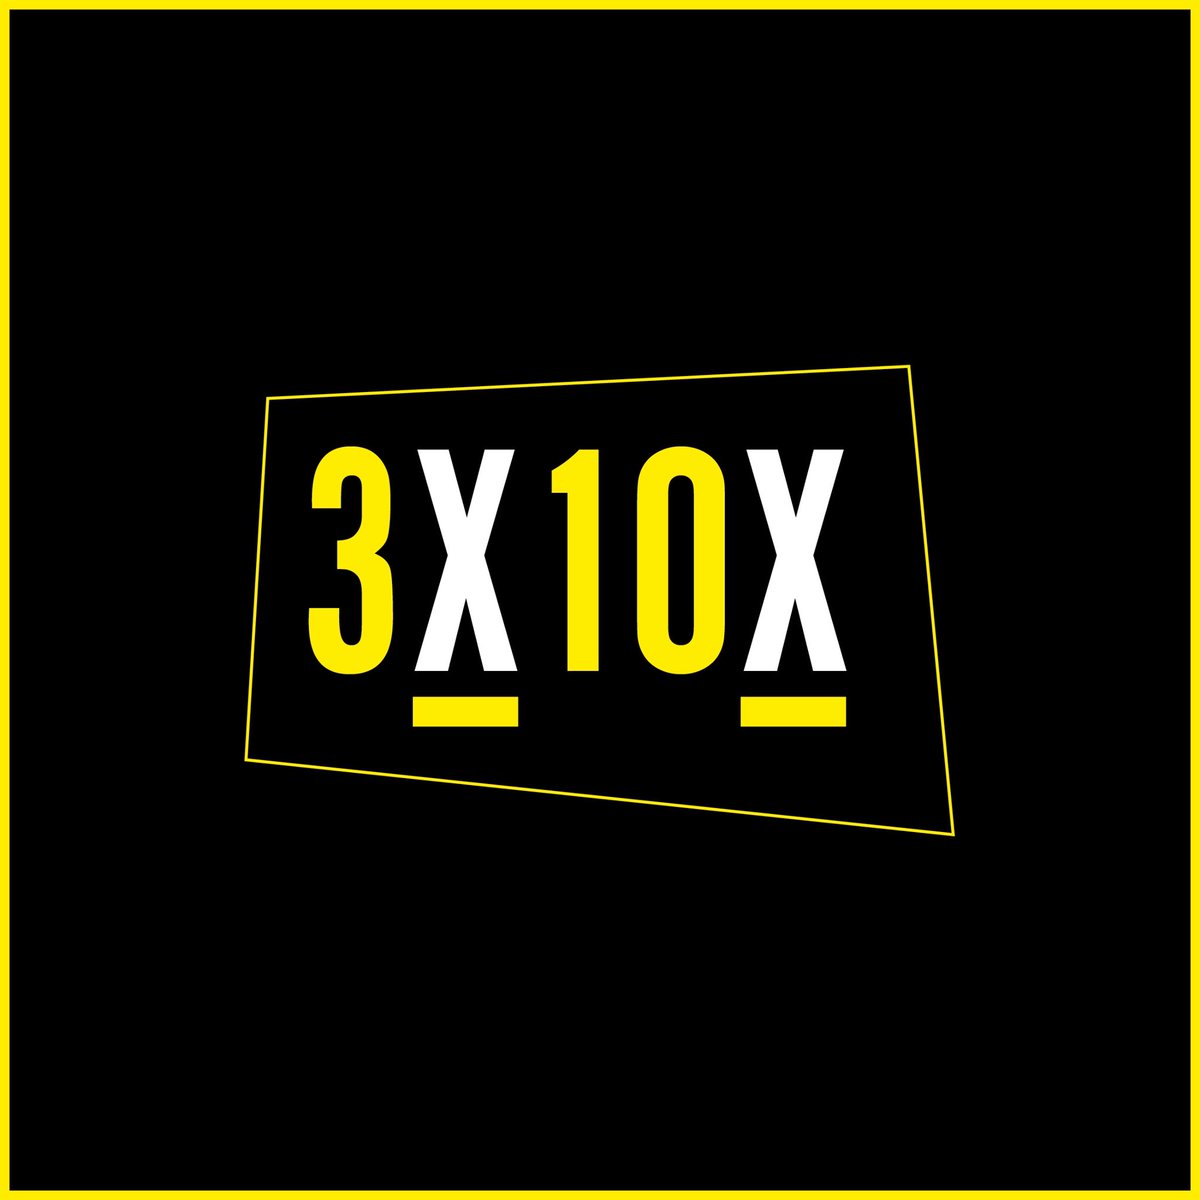 Our #3X10X vision is something we’re determined to reach. We want 3 times growth with 10 times the positive impact. This is because we are only interested in impactful growth. Period. We are excited for the future & for the change that’s coming. #3x10x #realisingpotential